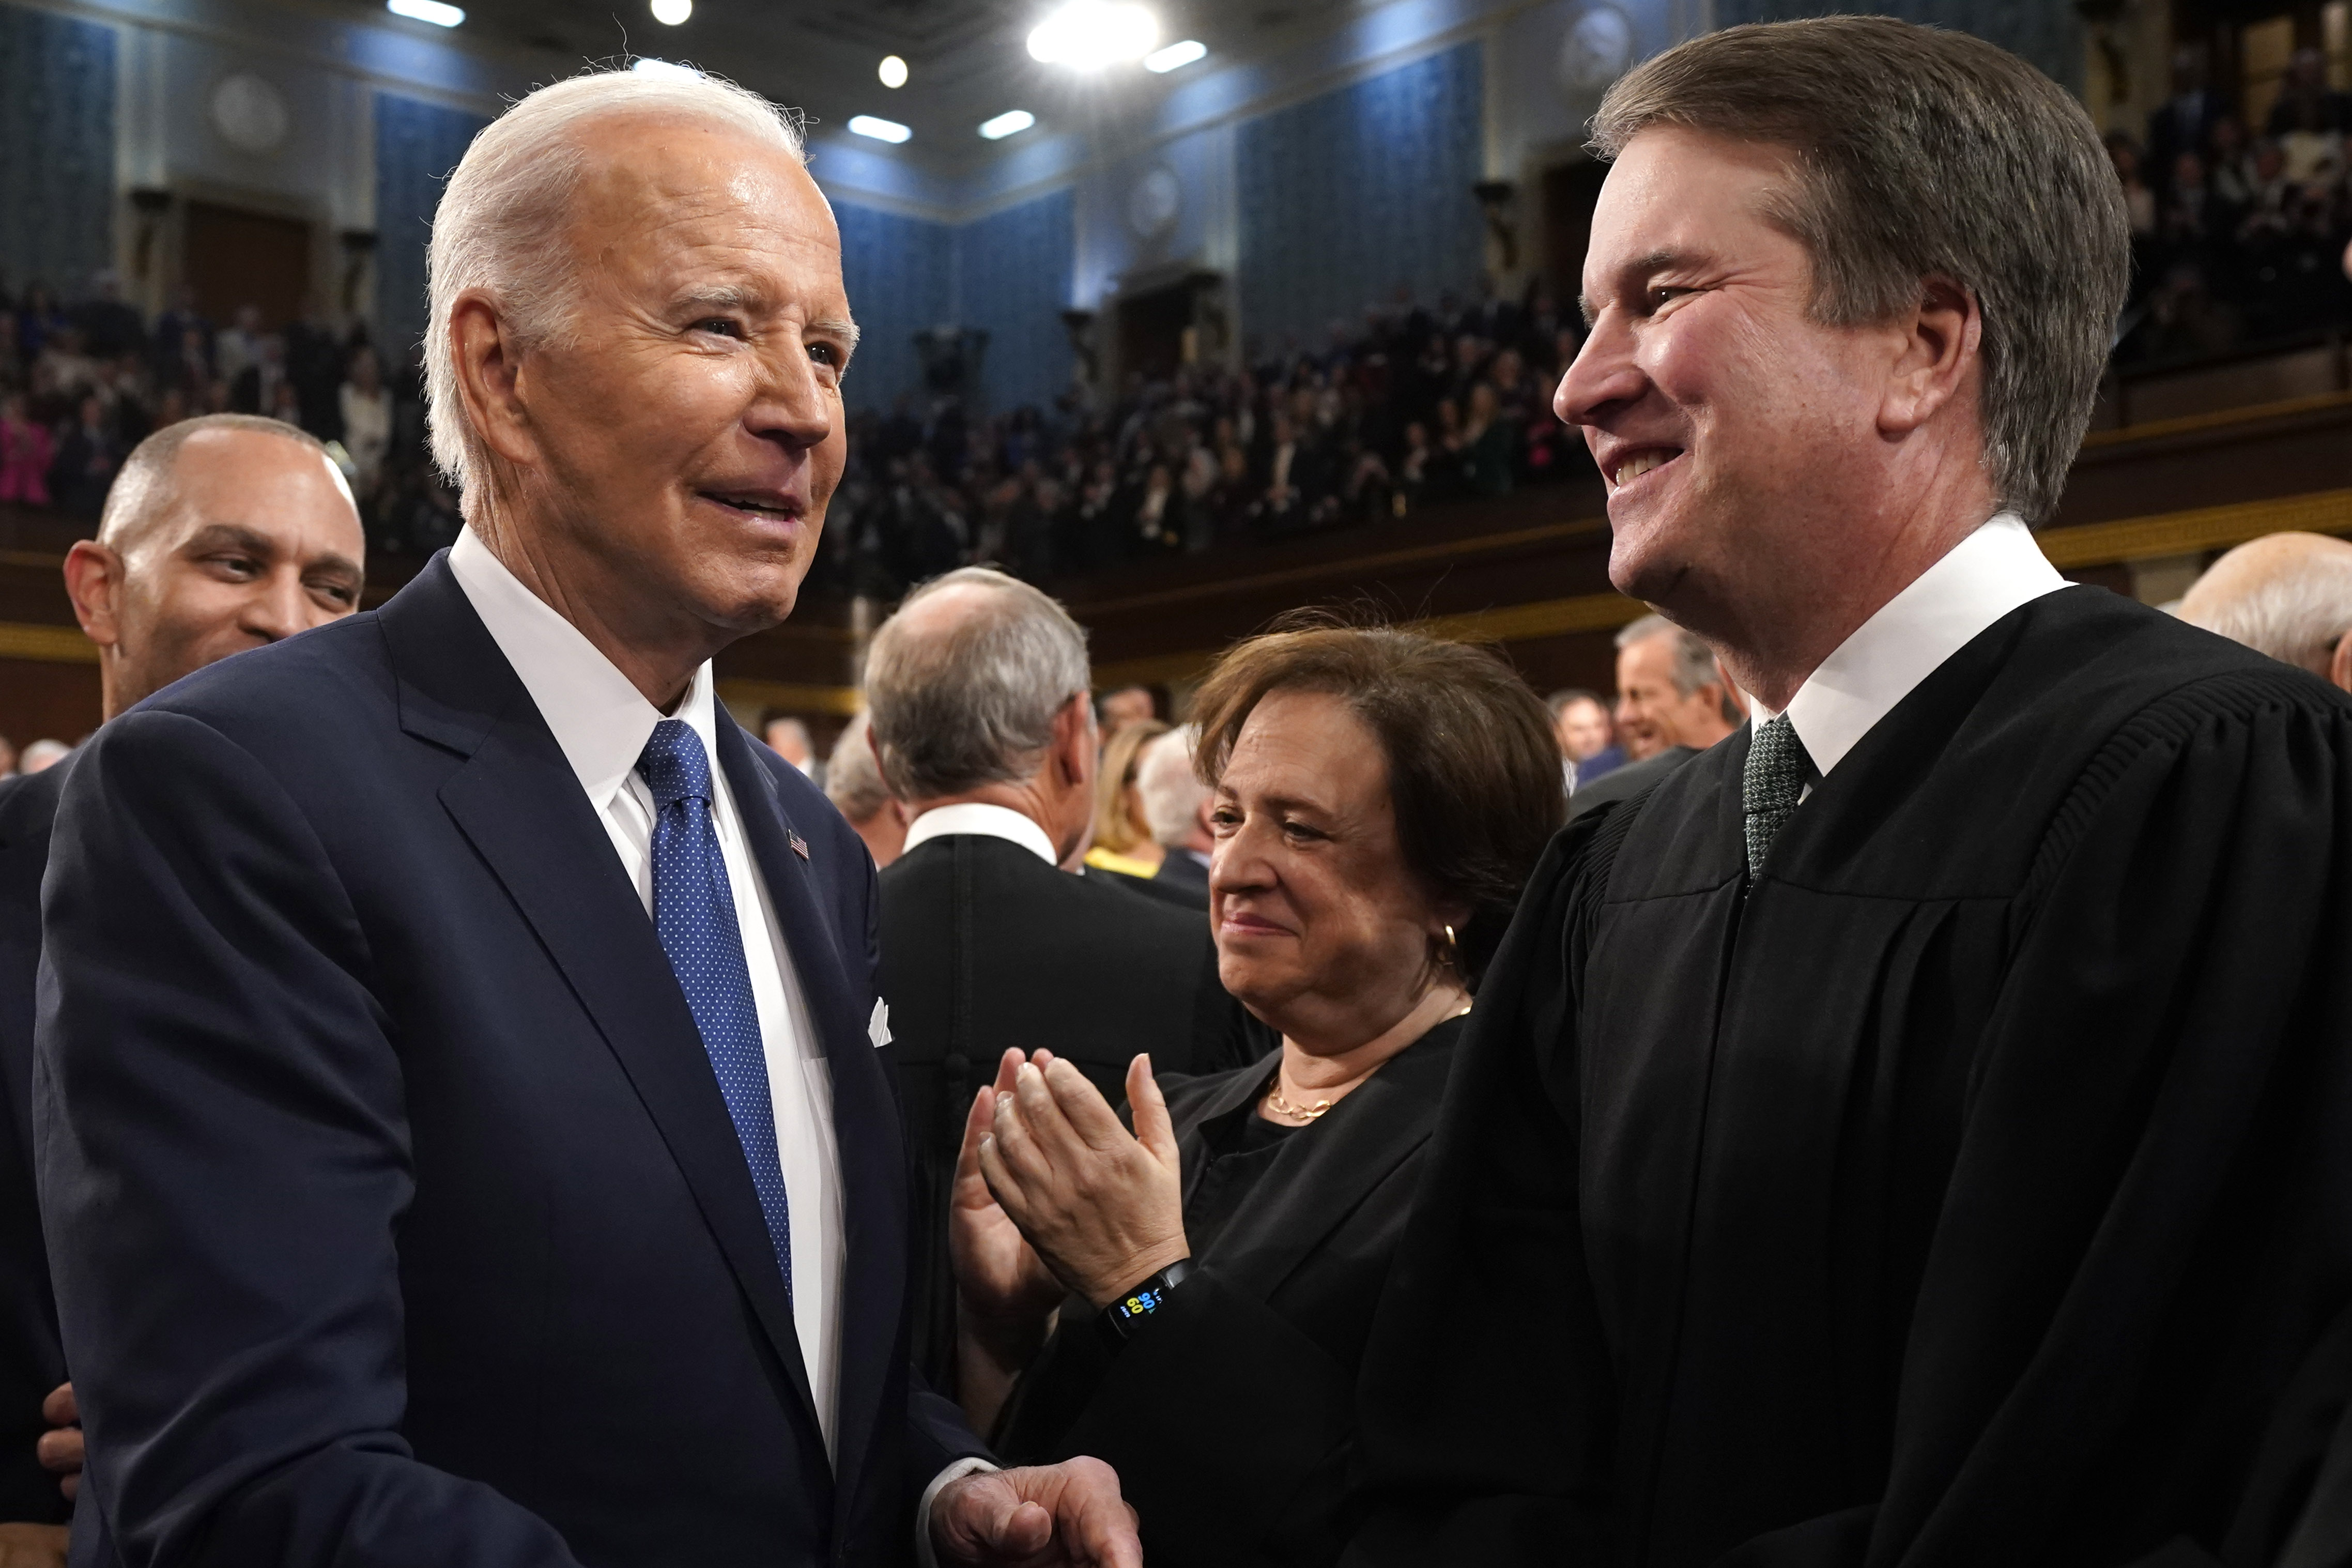 Buden and Kavanaugh face each other, with a crowded room of people in the background. 